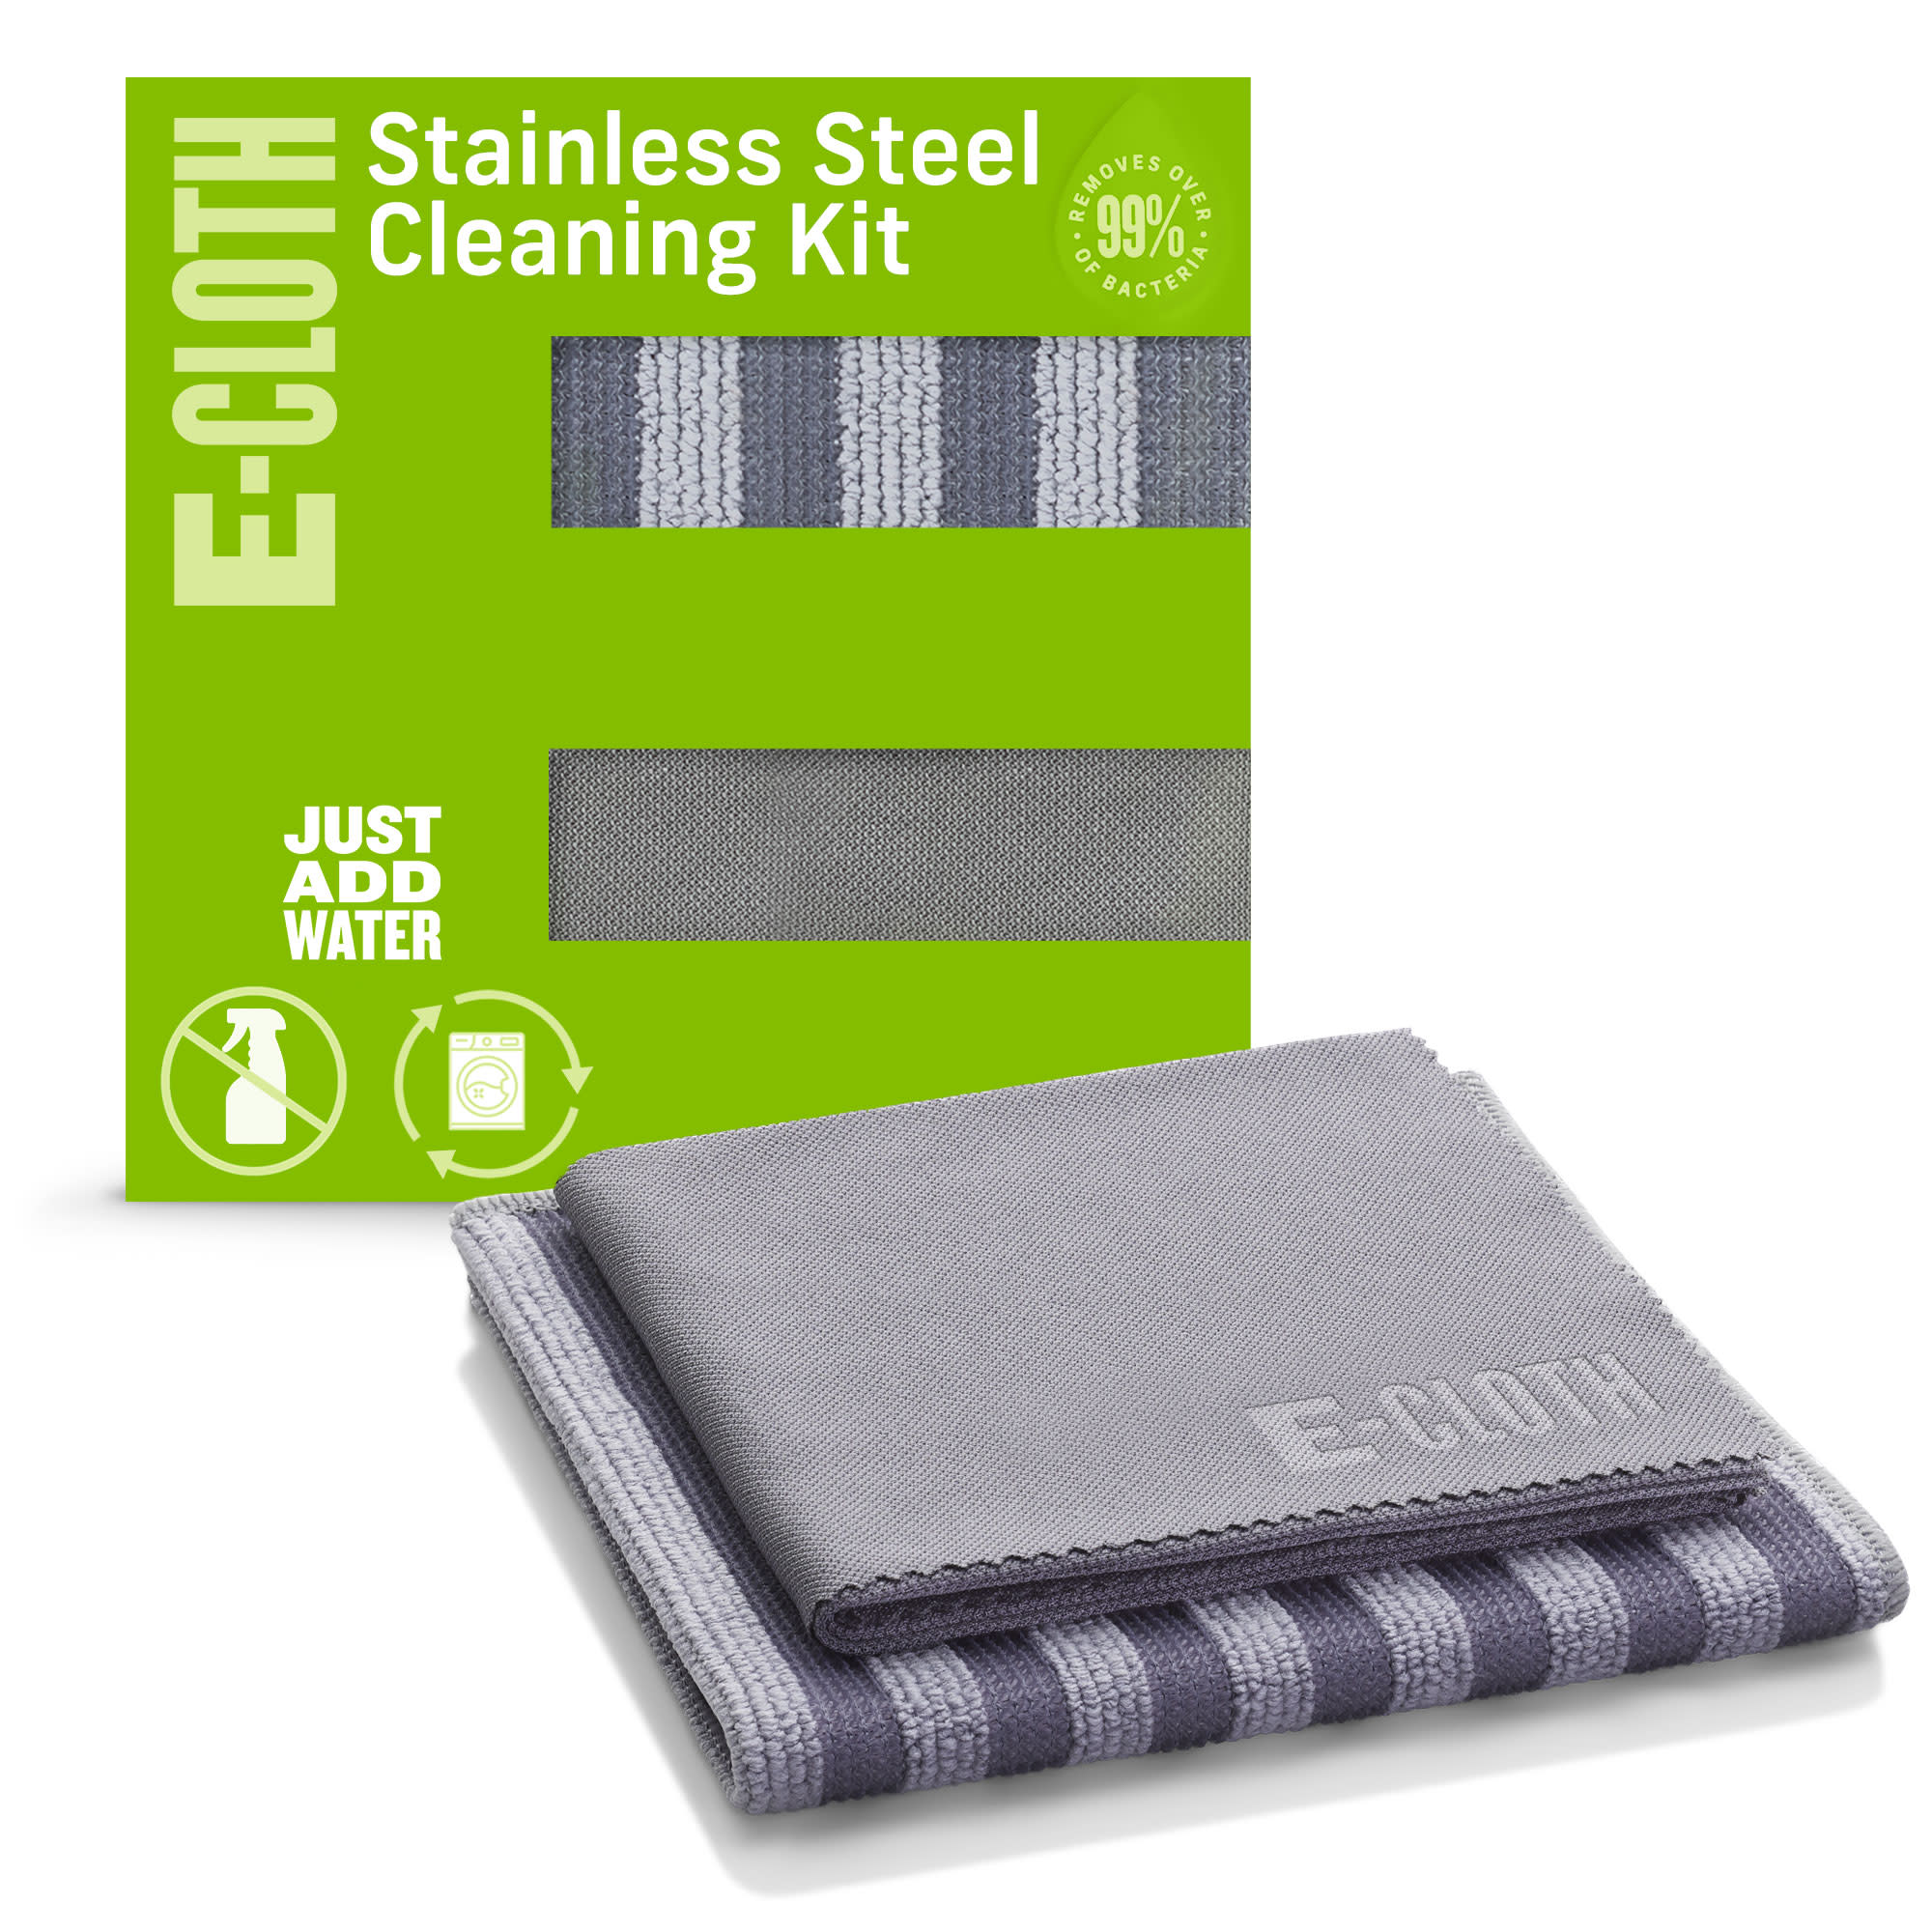 Stainless Steel Cleaning Kit